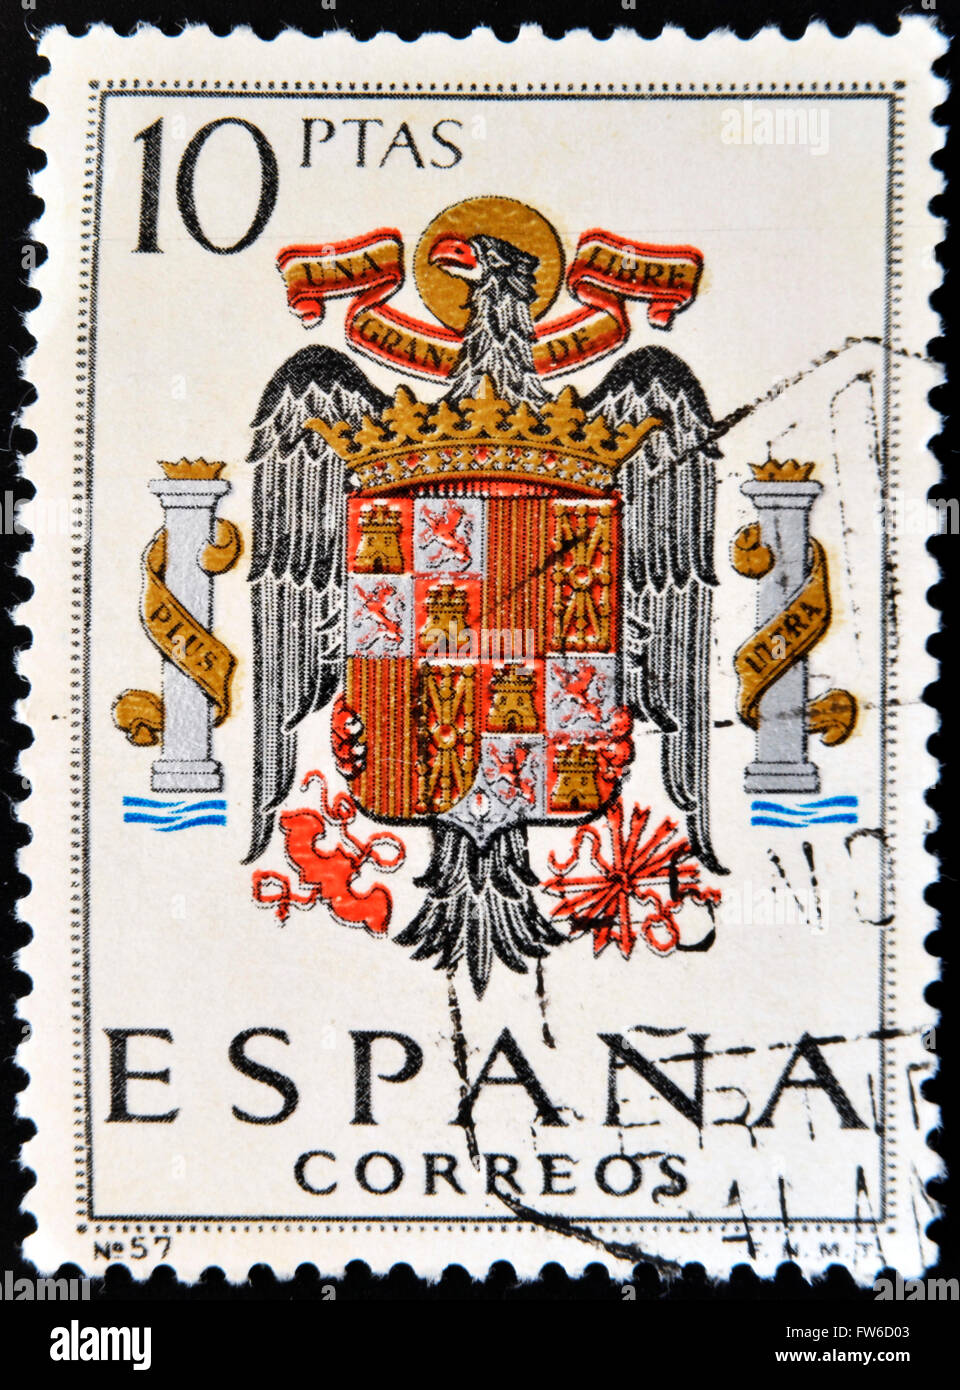 SPAIN - CIRCA 1965: A stamp printed in Spain shows shield of Spain during the Franco dictatorship, circa 1965. Stock Photo